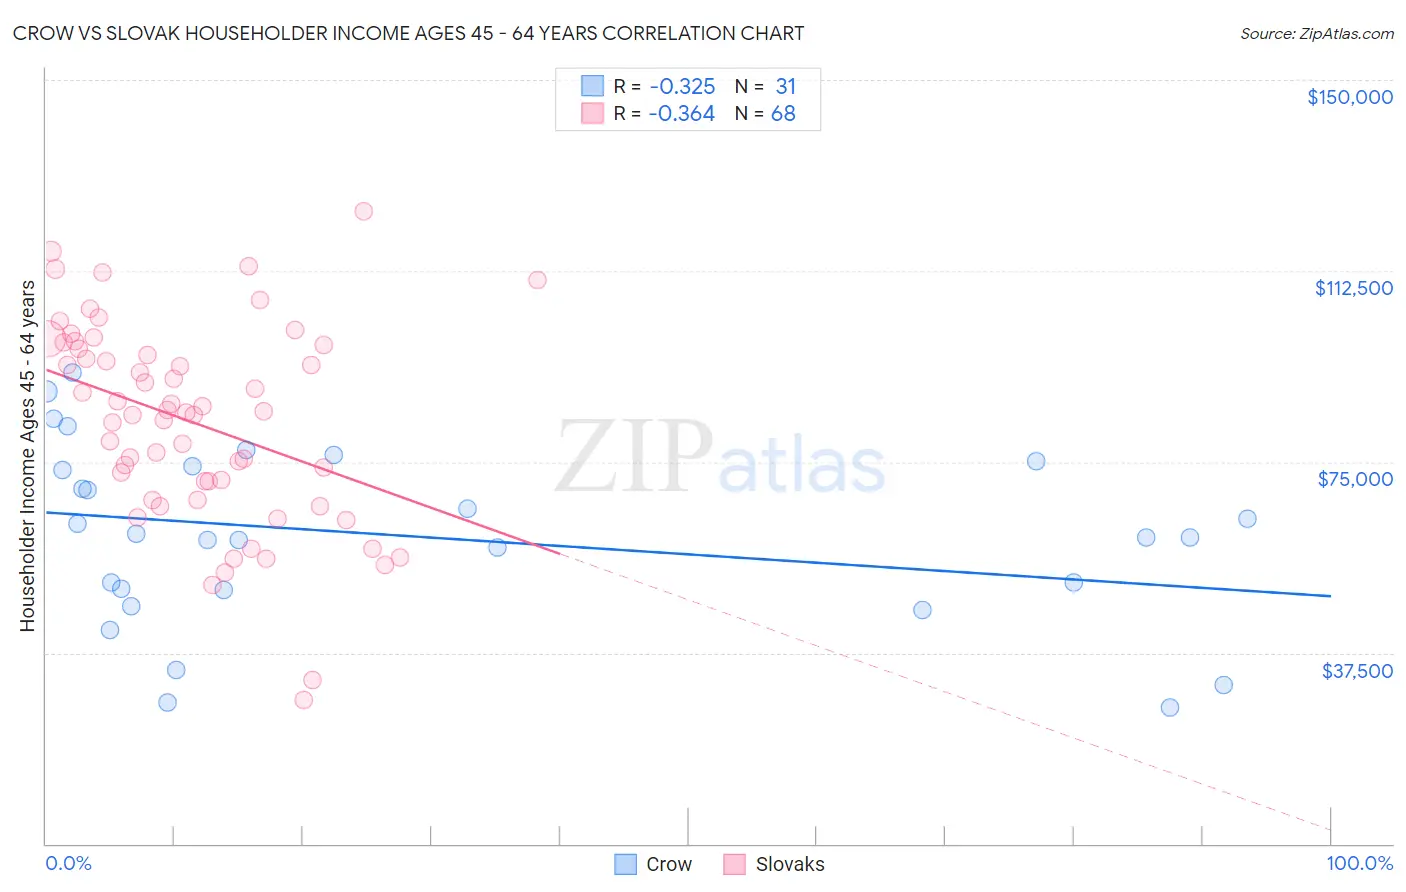 Crow vs Slovak Householder Income Ages 45 - 64 years